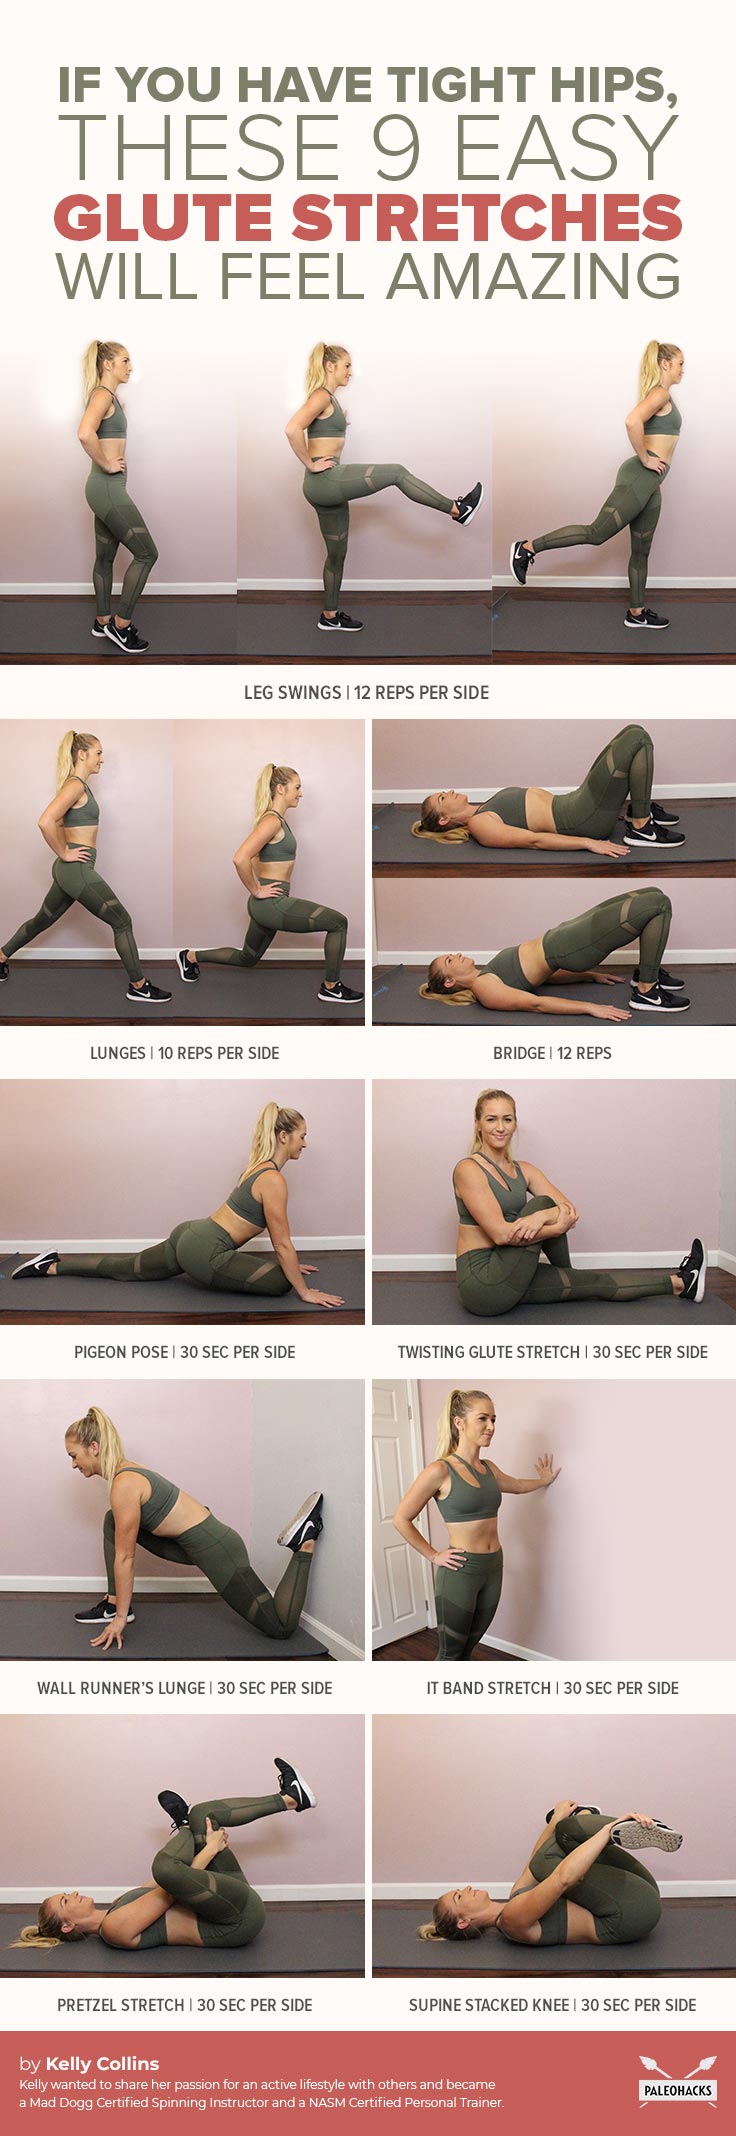 Tight hips got you feeling stiff and achy? Use these nine glute stretches to alleviate tension in your hips.